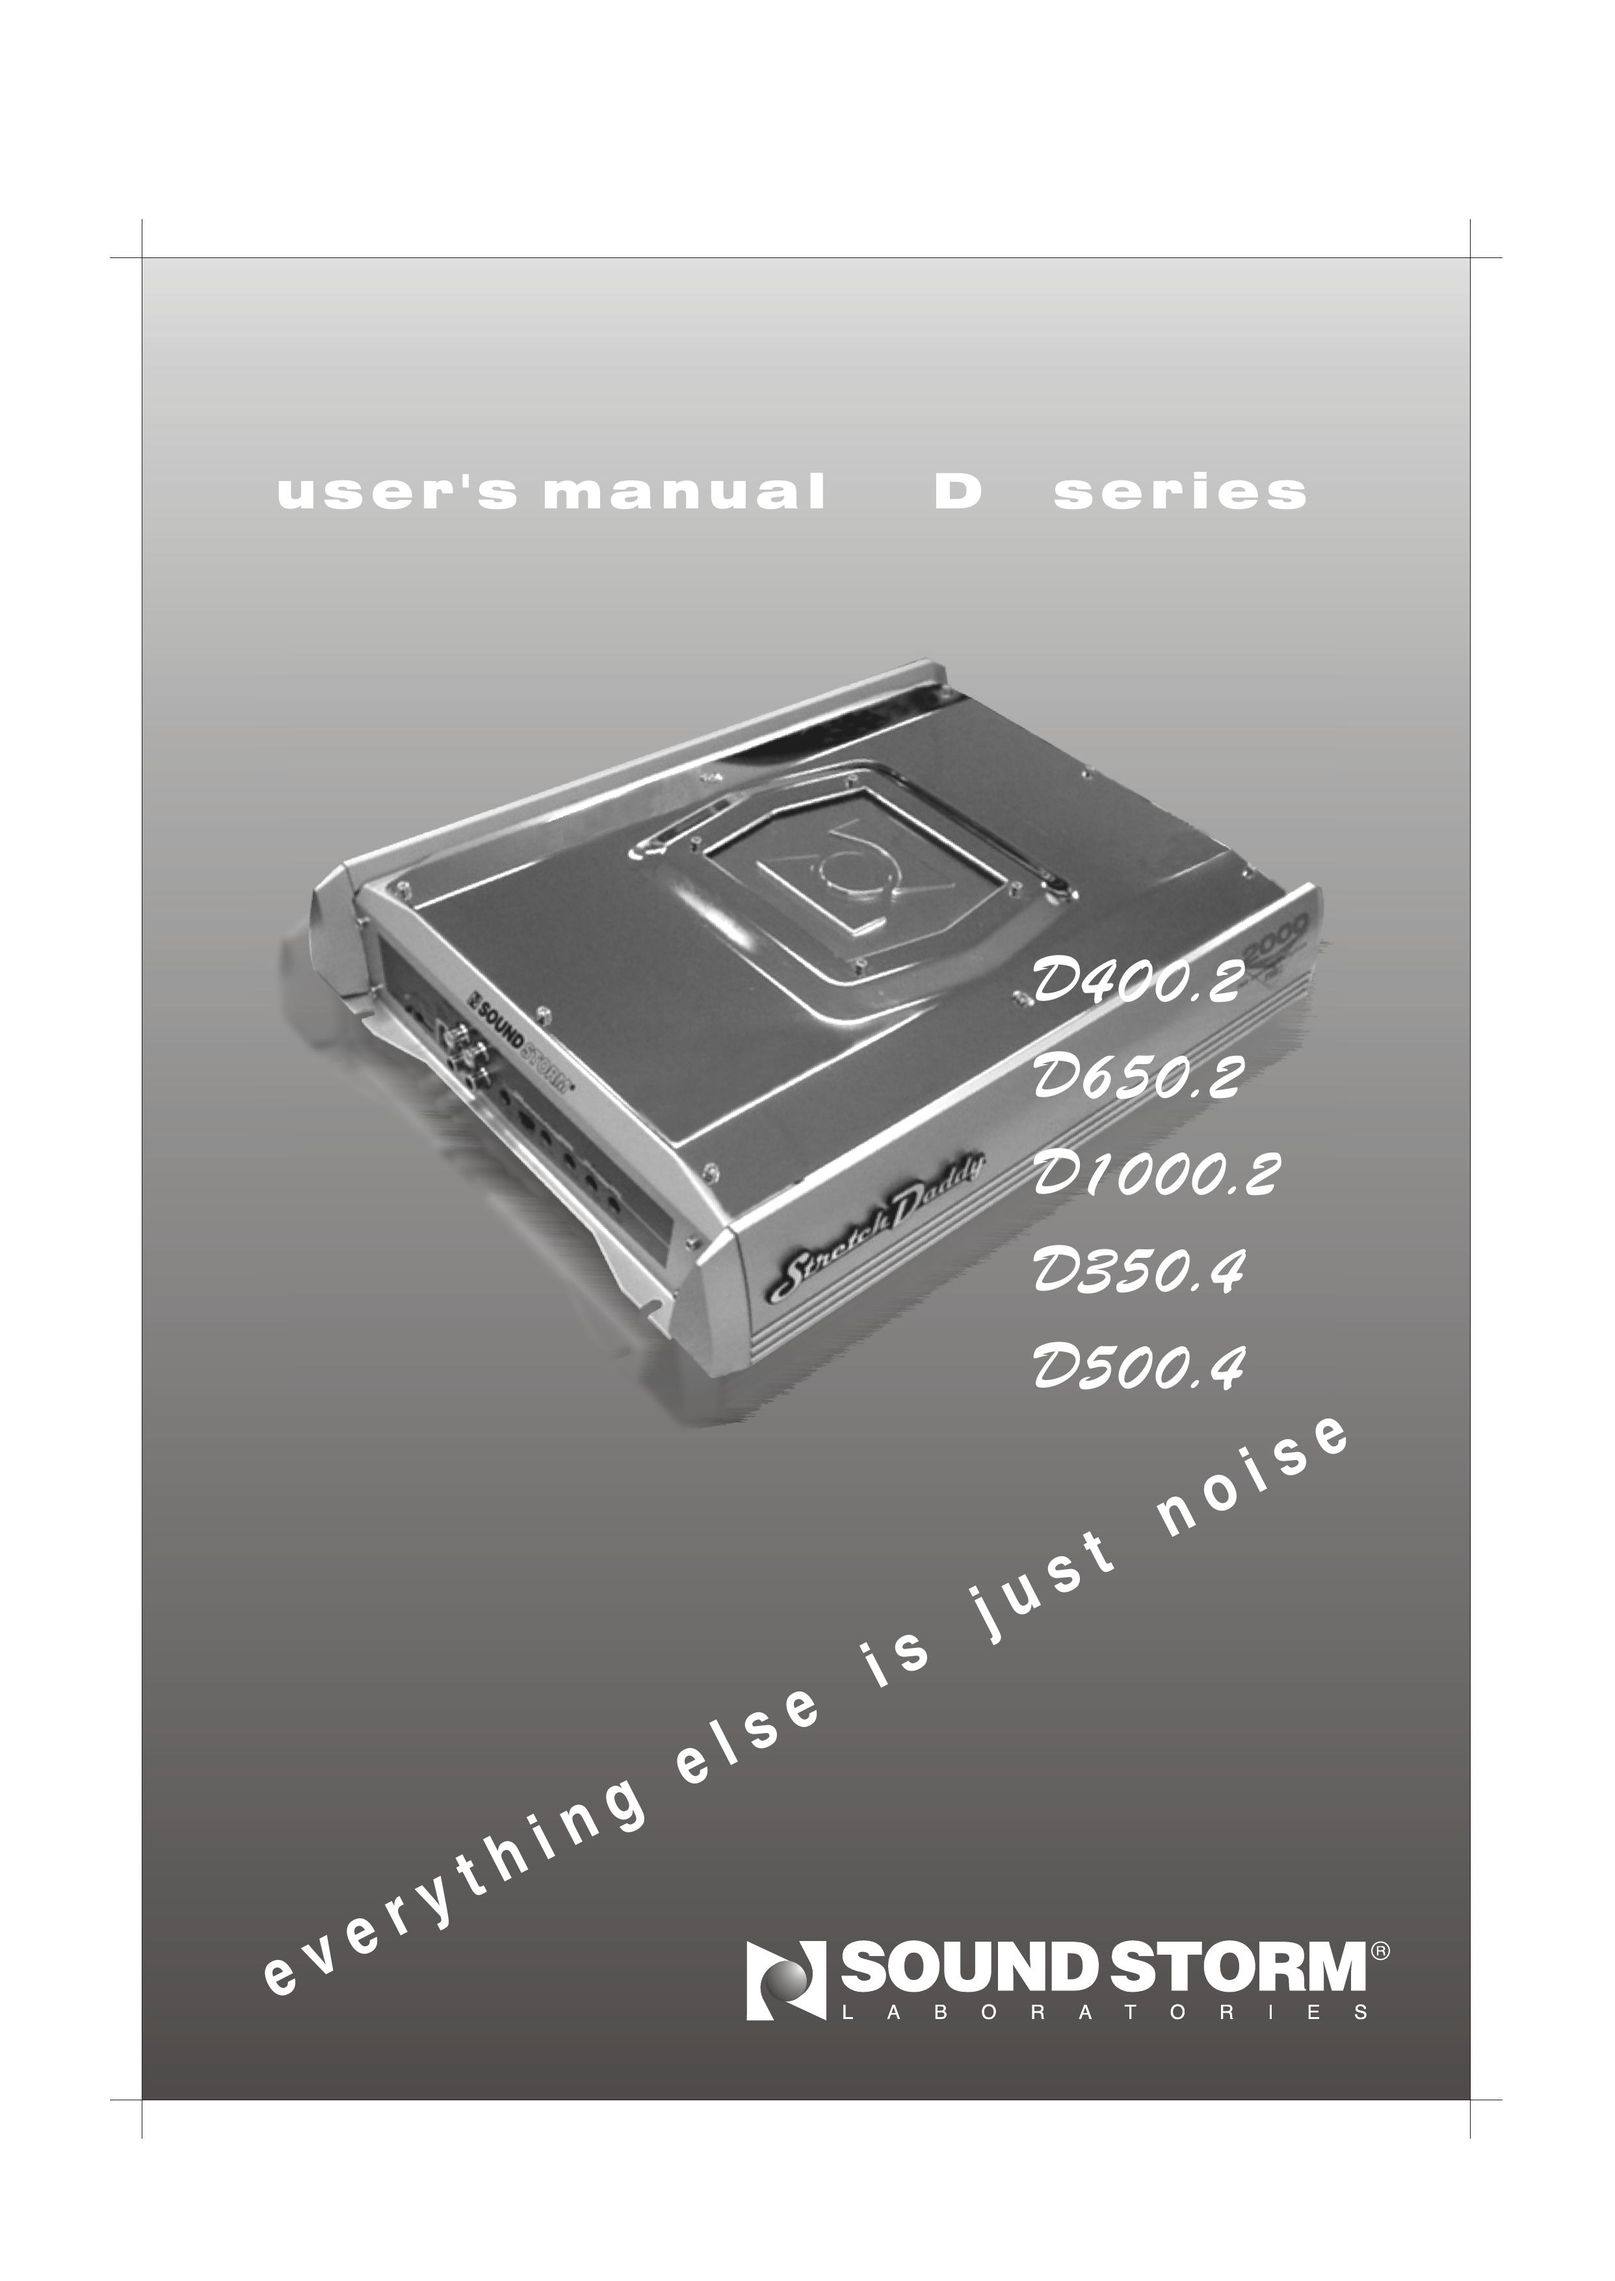 Sound Storm Laboratories D400.2 Stereo Amplifier User Manual